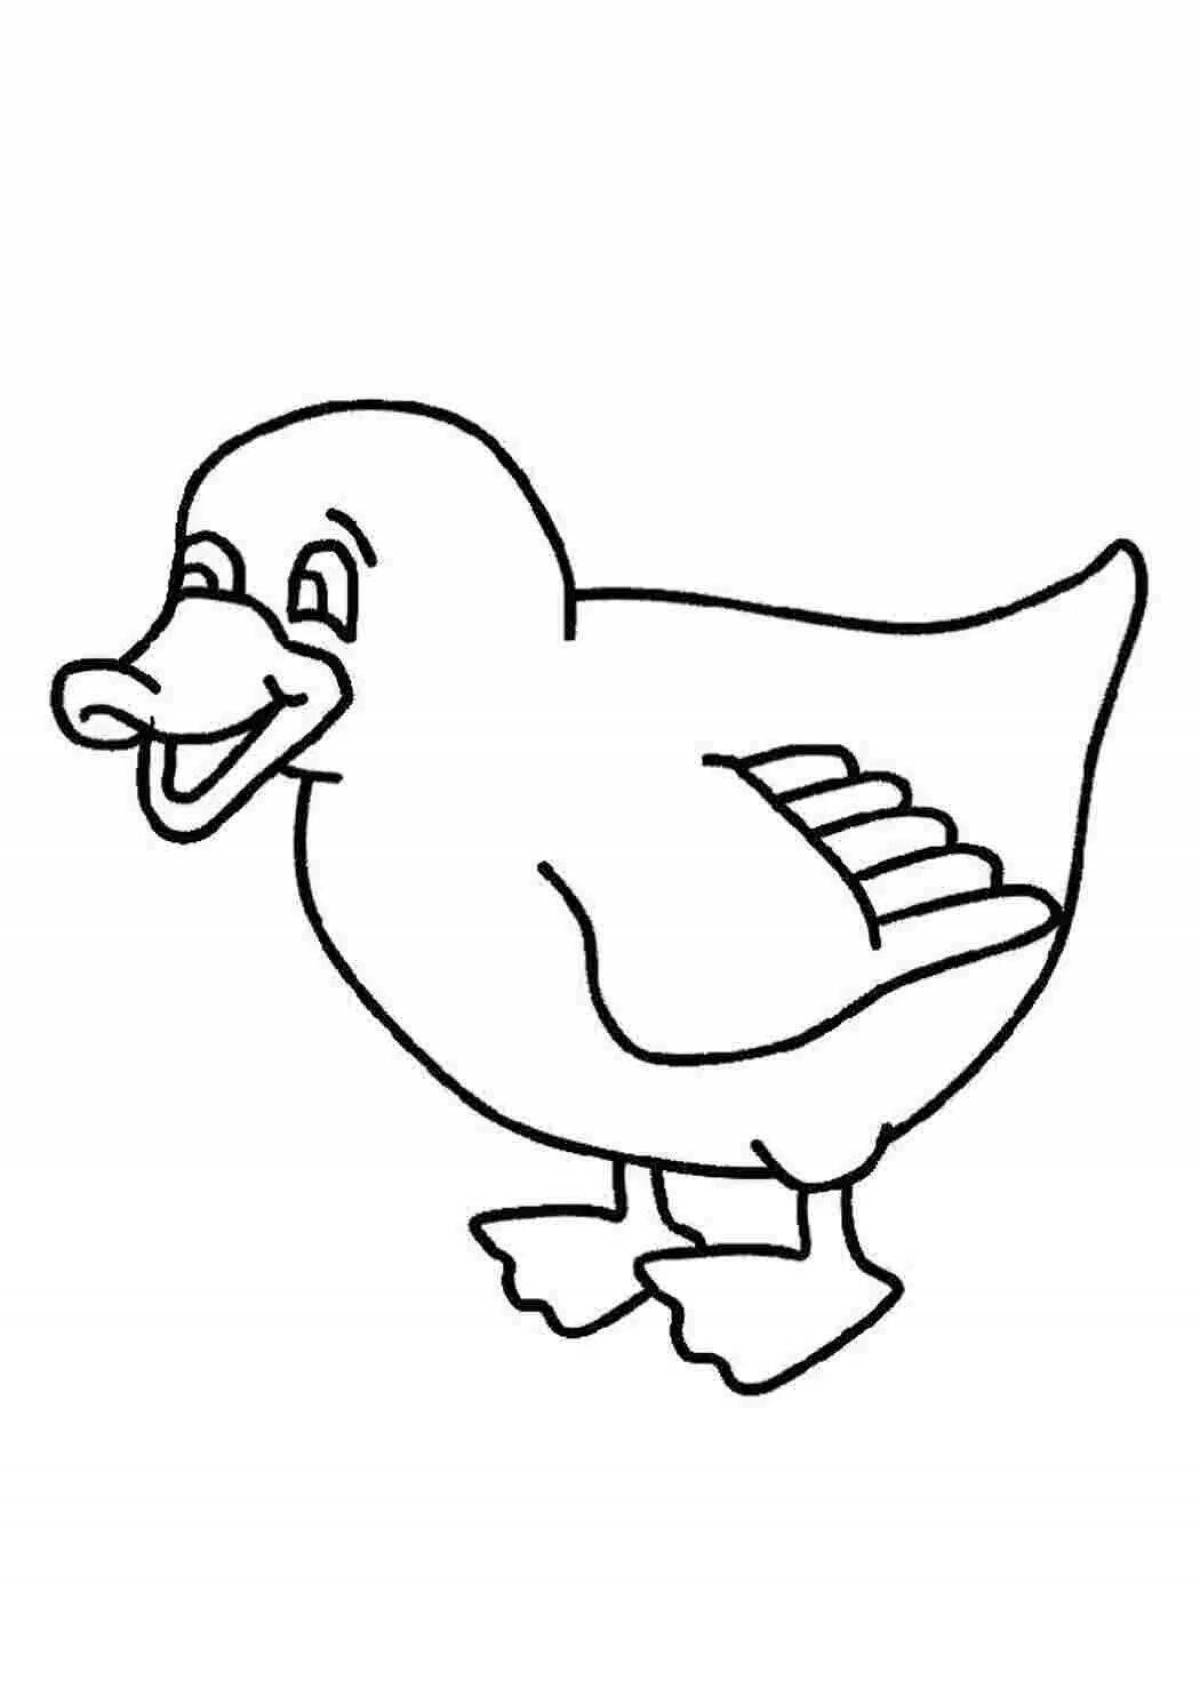 Sweet mandarin duck coloring pages for kids